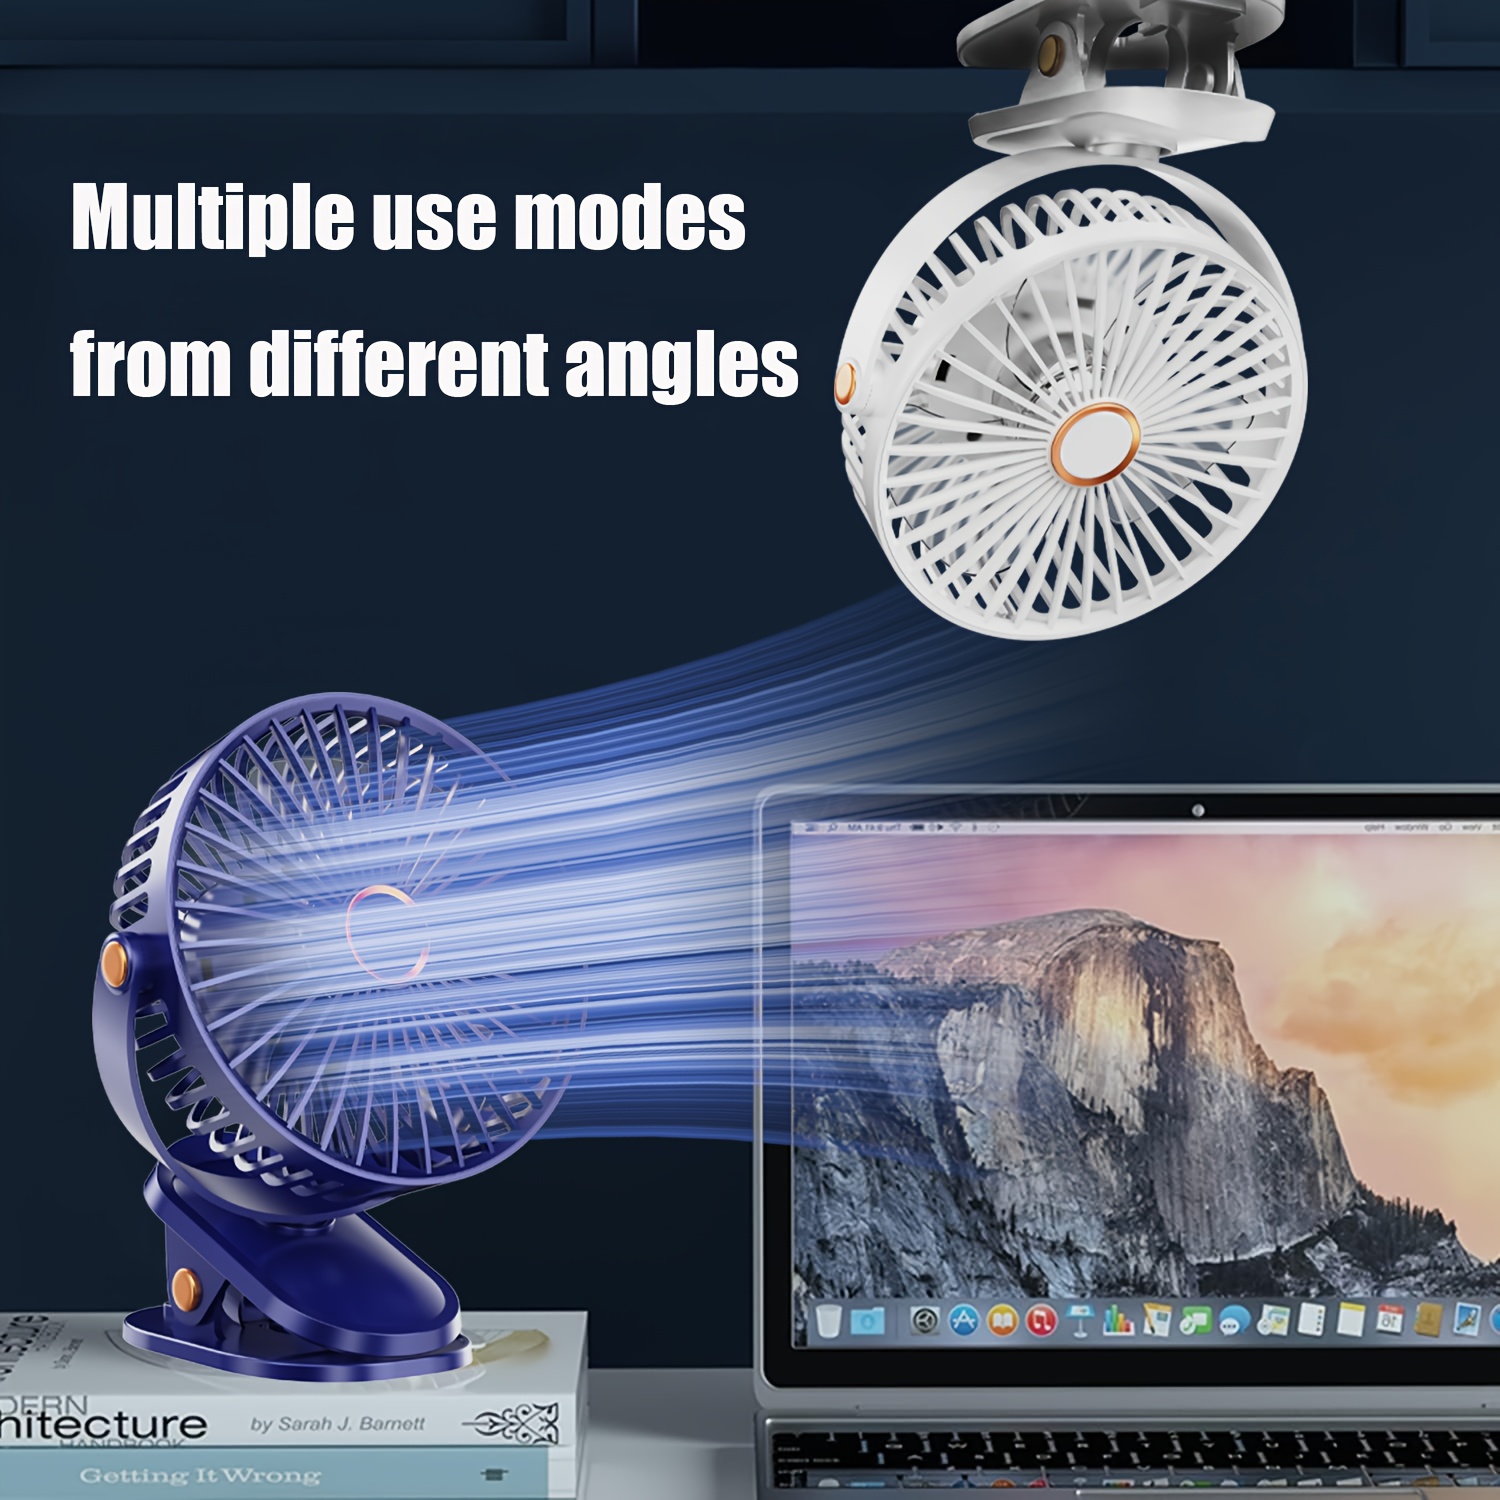 1pc 6 inch multipurpose clip on fan 5 speed adjustment quiet operation removable and washable front cover portable fan for desk hanging office home outdoor dorm students fishing camping travel plastic material